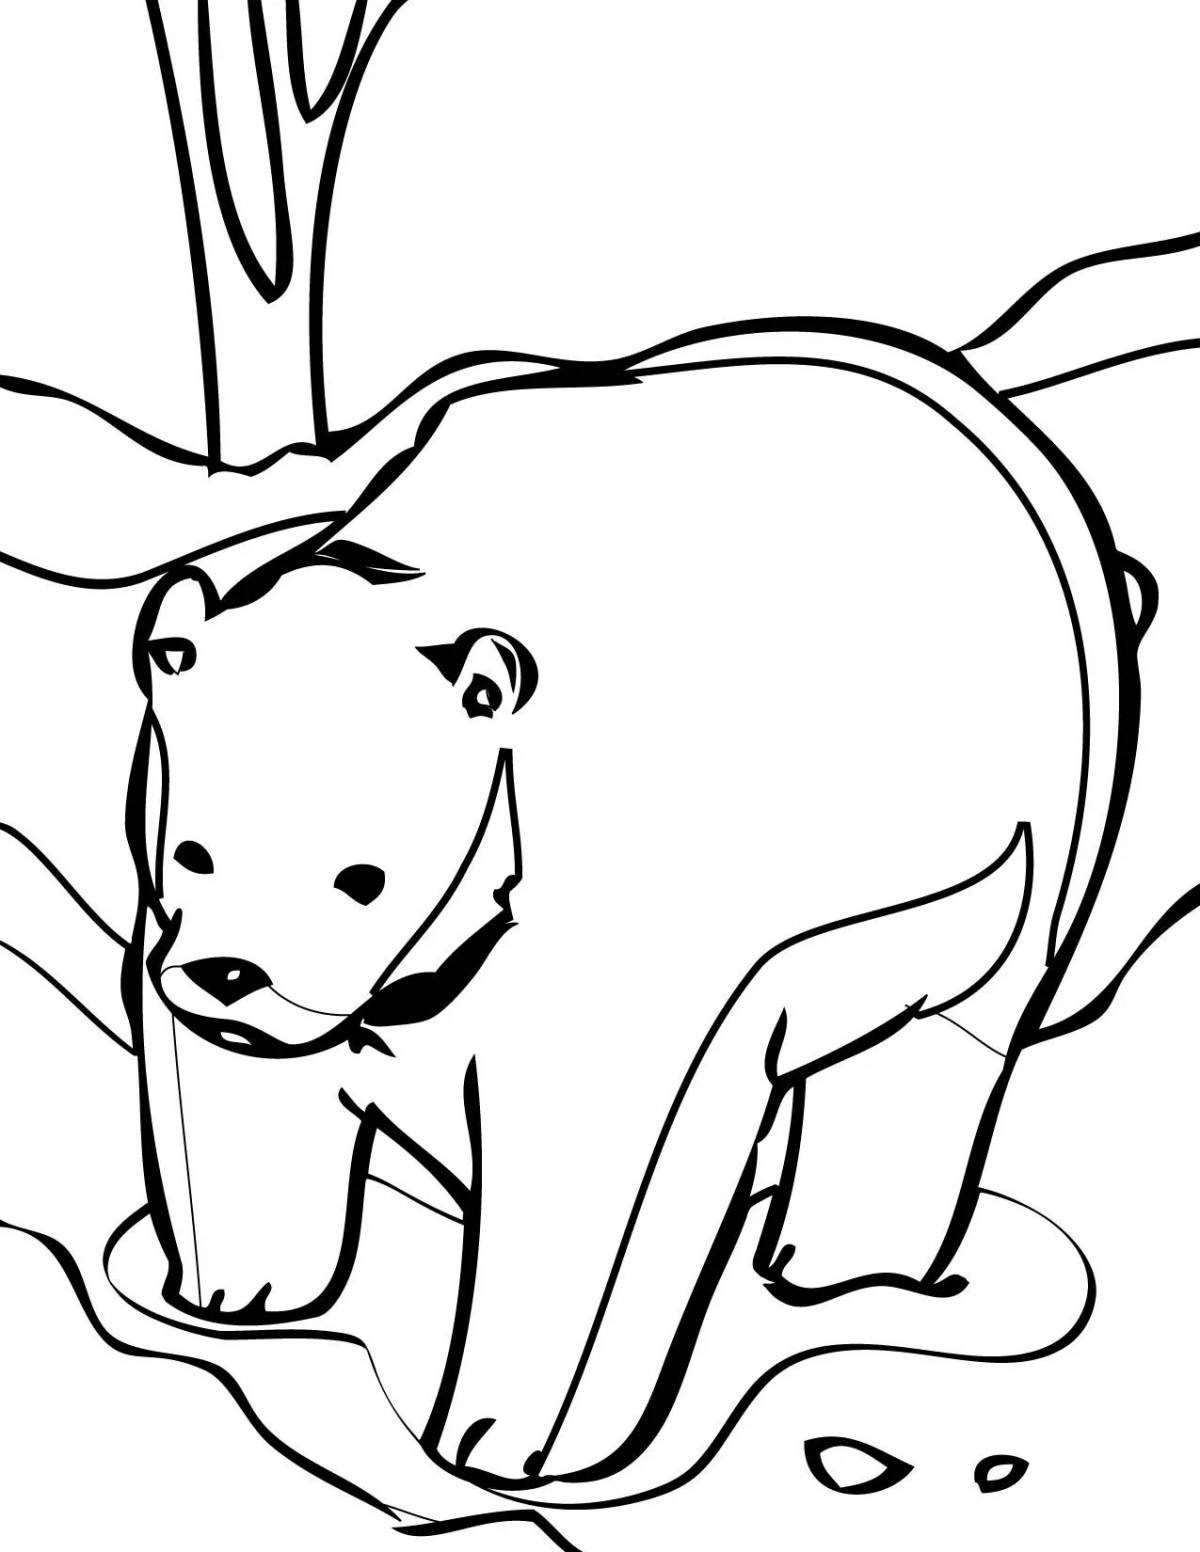 Bright bear in the den coloring for children